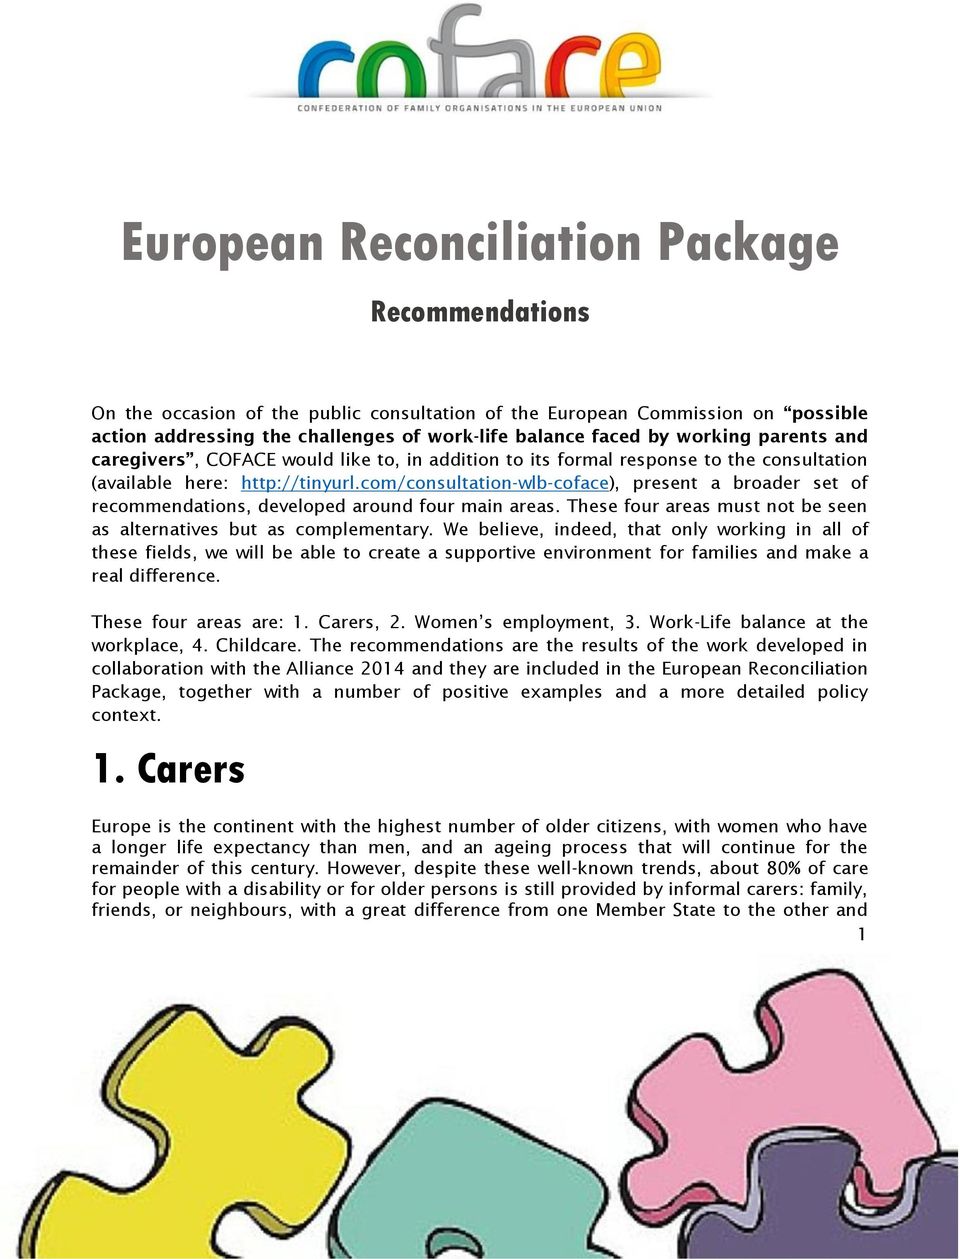 com/consultation-wlb-coface), present a broader set of recommendations, developed around four main areas. These four areas must not be seen as alternatives but as complementary.